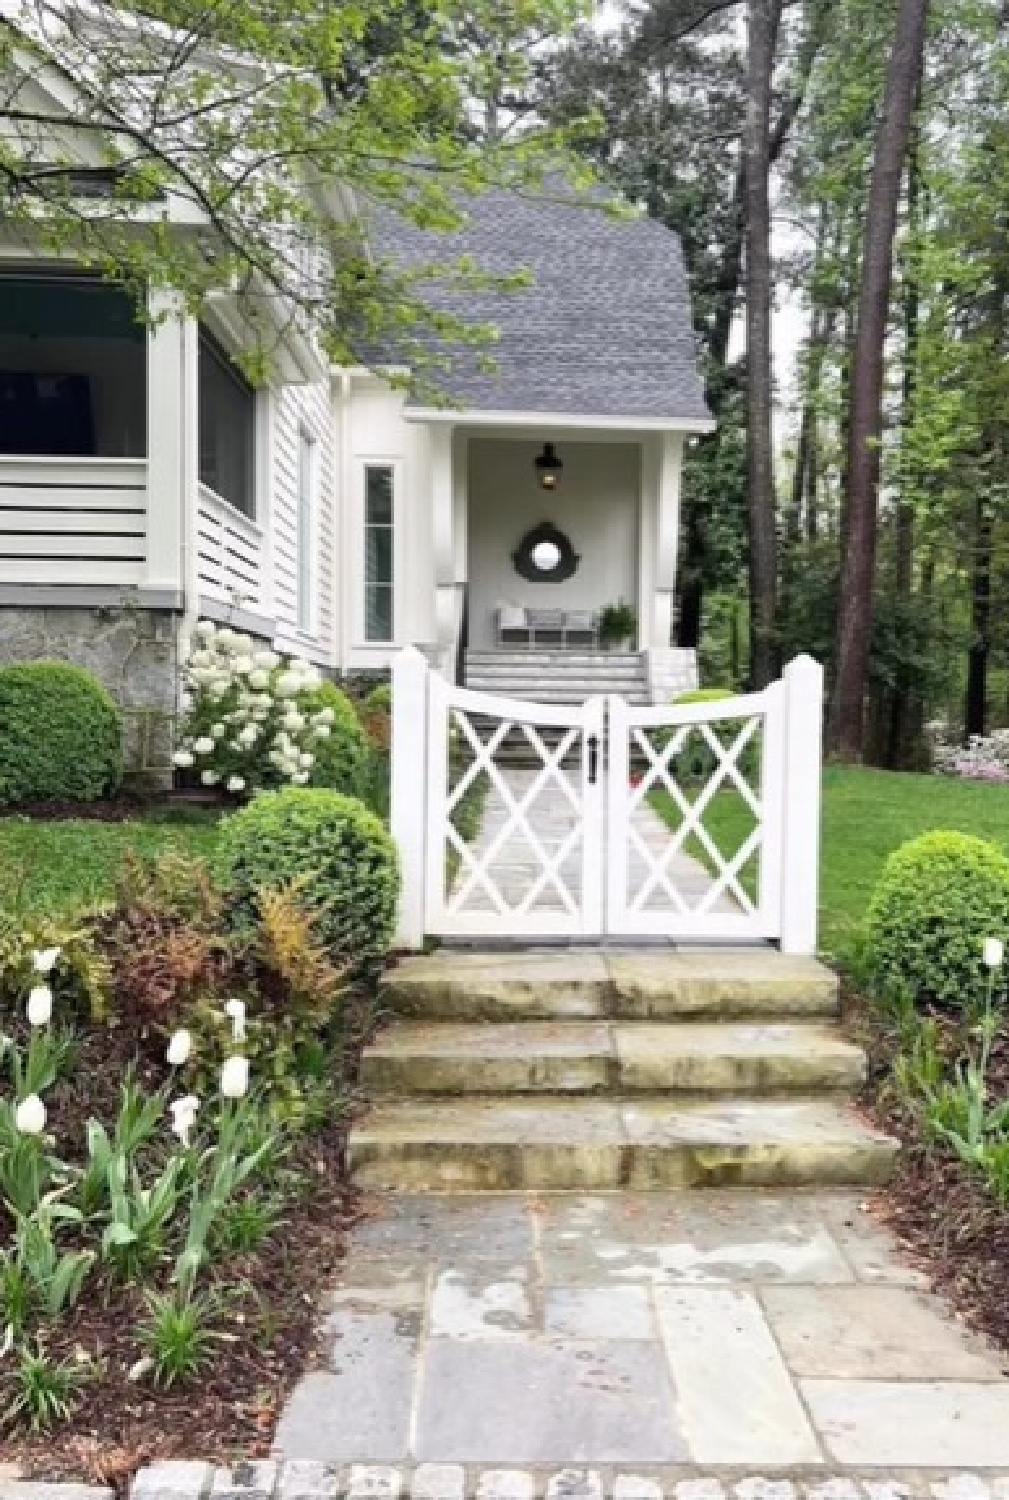 Beautiful curb appeal with charming gate, stone, and tulips - photo by Sherry Hart.